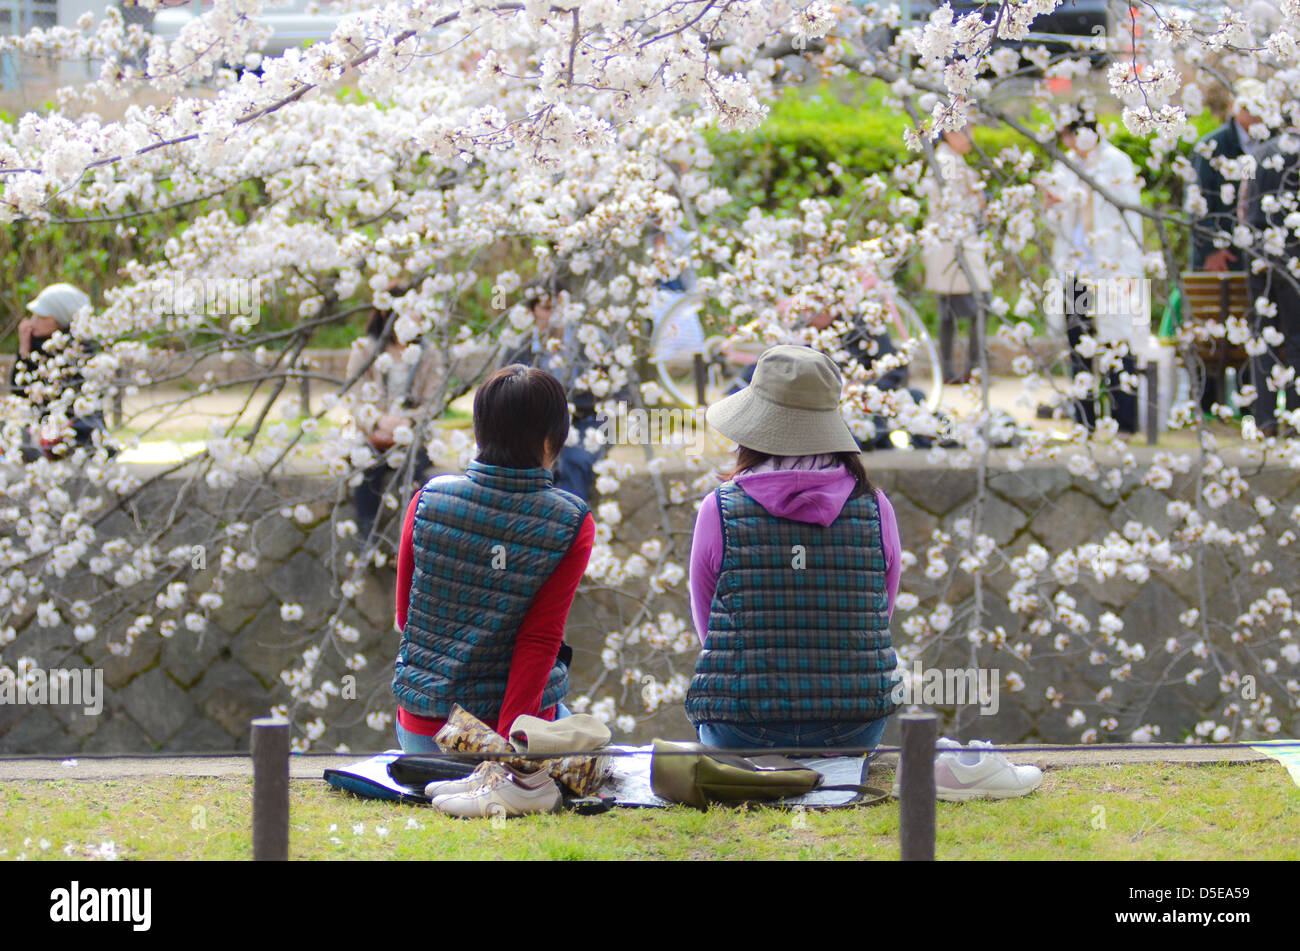 Kobe, Japan. 30th March, 2013 – Families and friends gather along a river in Shukugawa near Kobe on Saturday to celebrate the coming of spring. Credit image: Trevor Mogg / Alamy Live News Stock Photo